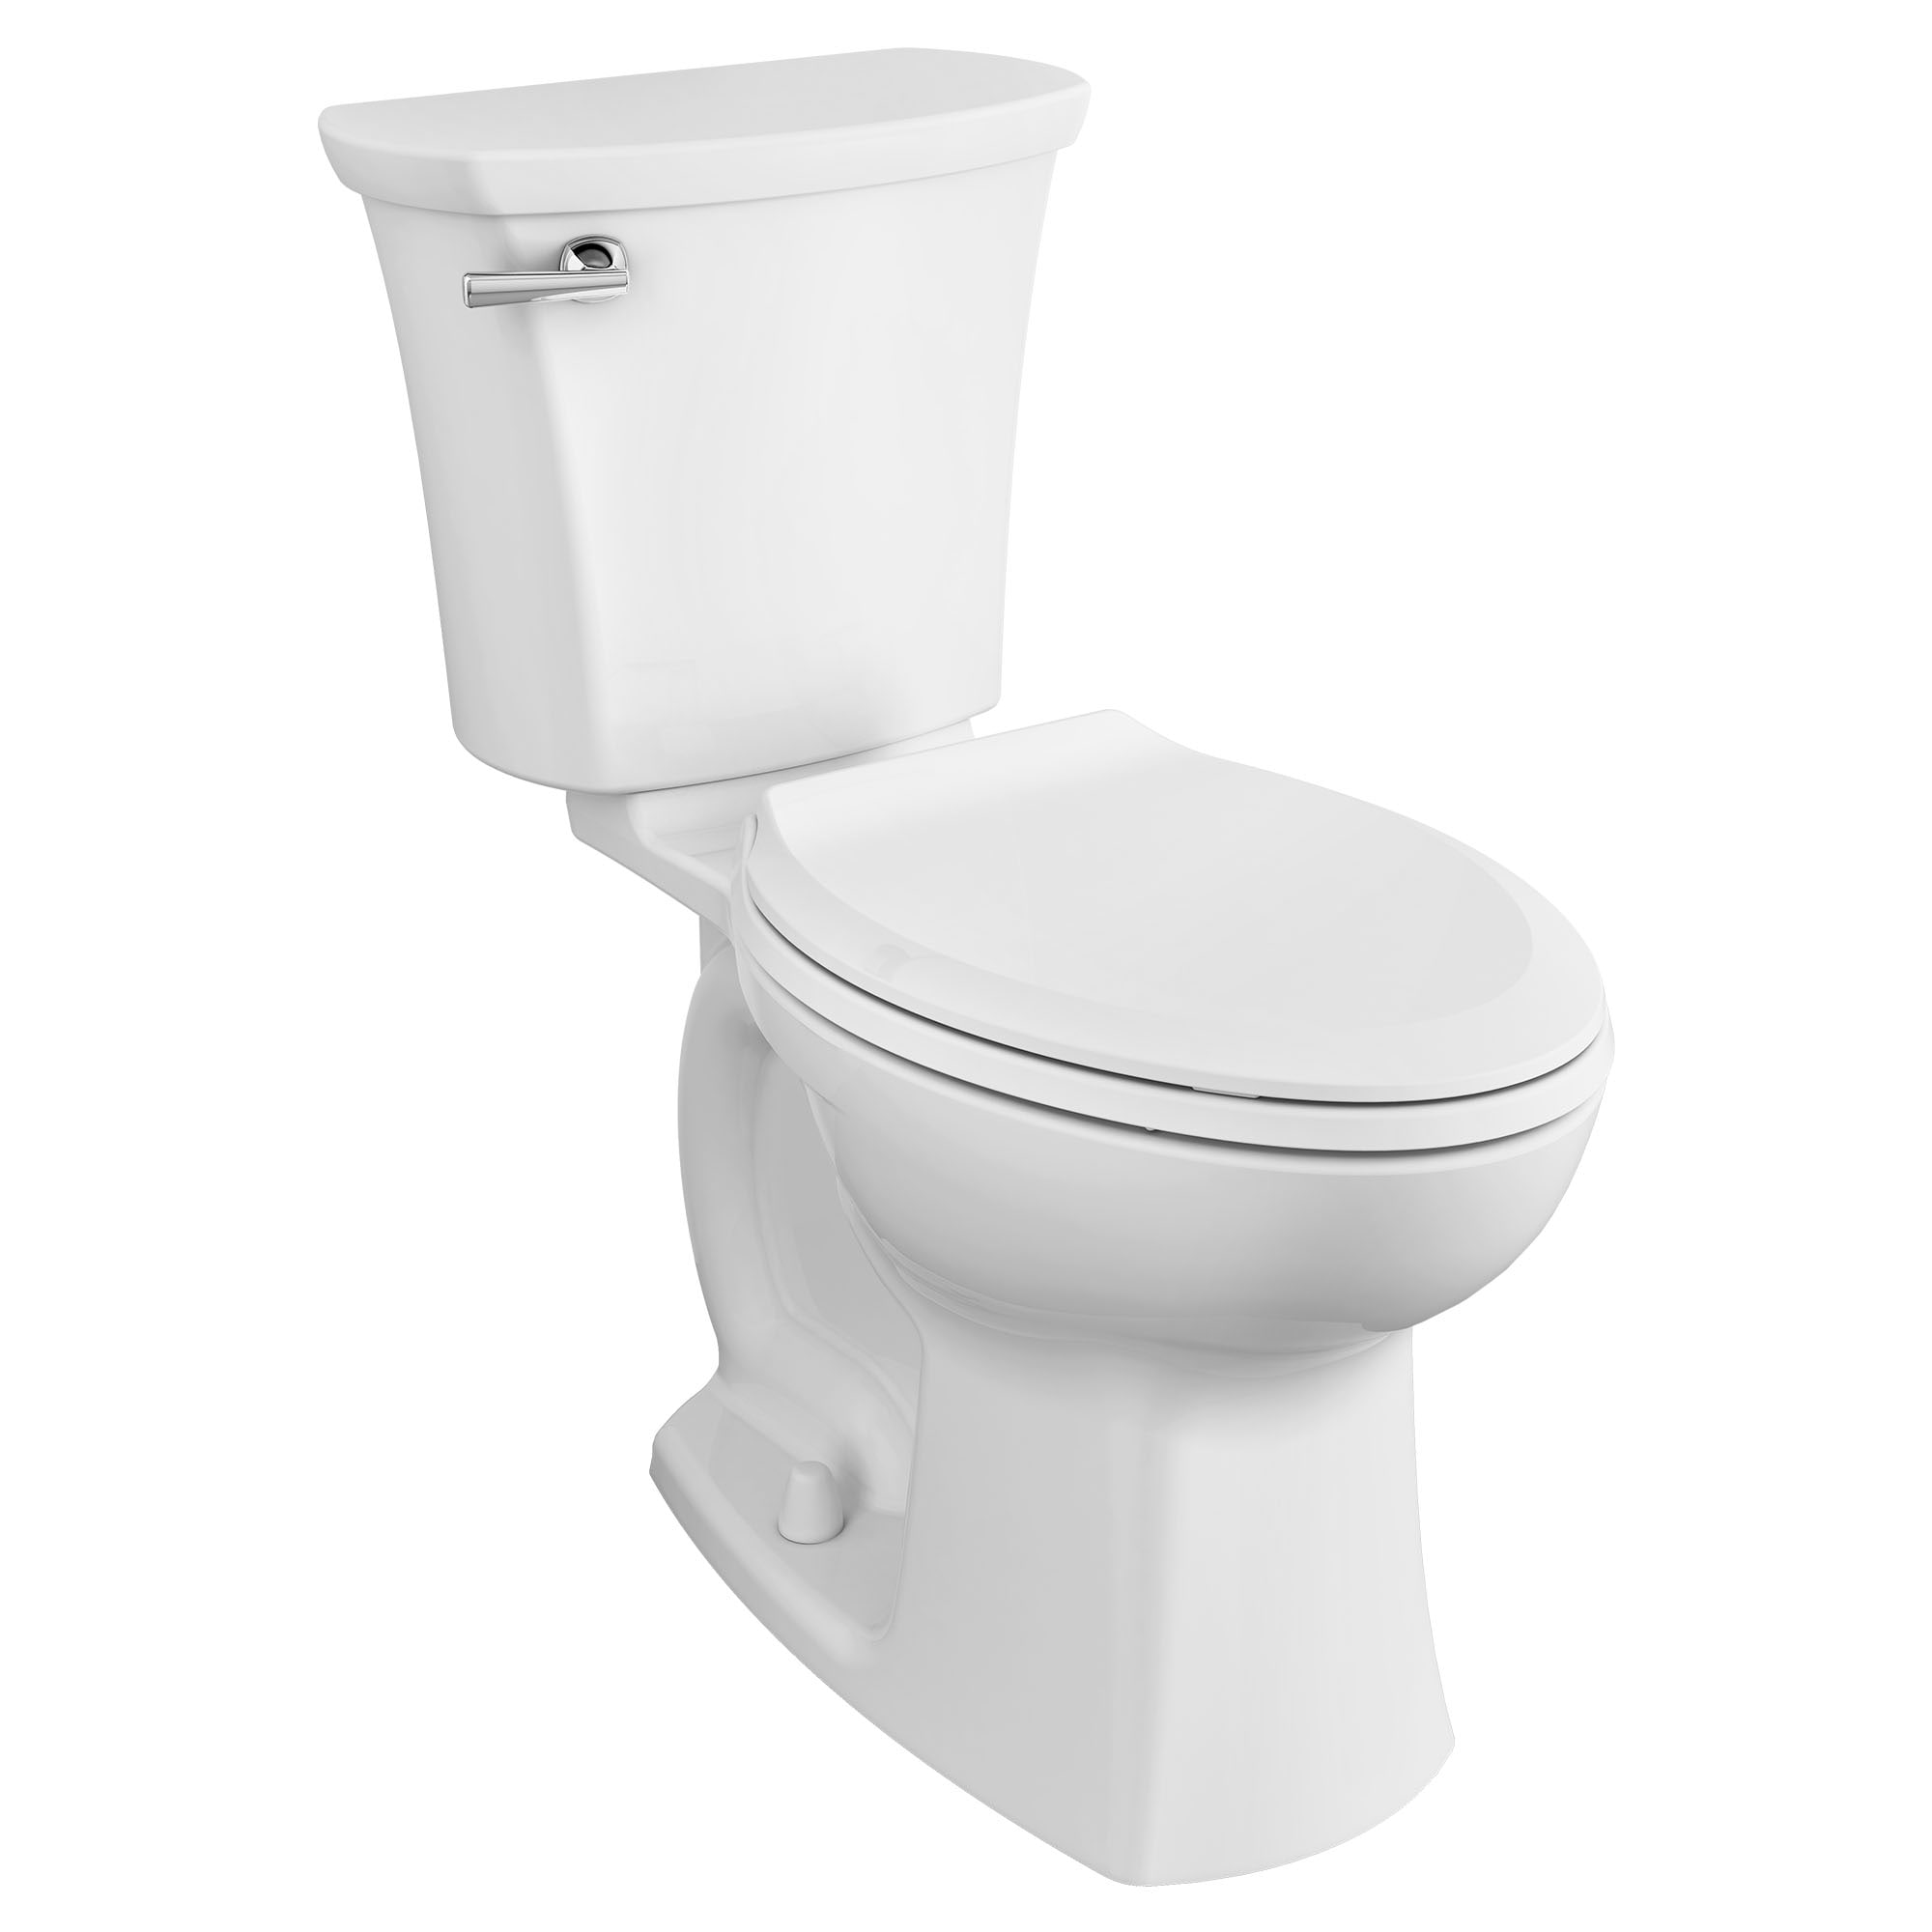 American Standard Edgemere White Elongated Chair Height 2-piece WaterSense Toilet 12-in Rough-In (ADA Compliant) the Toilets department at Lowes.com